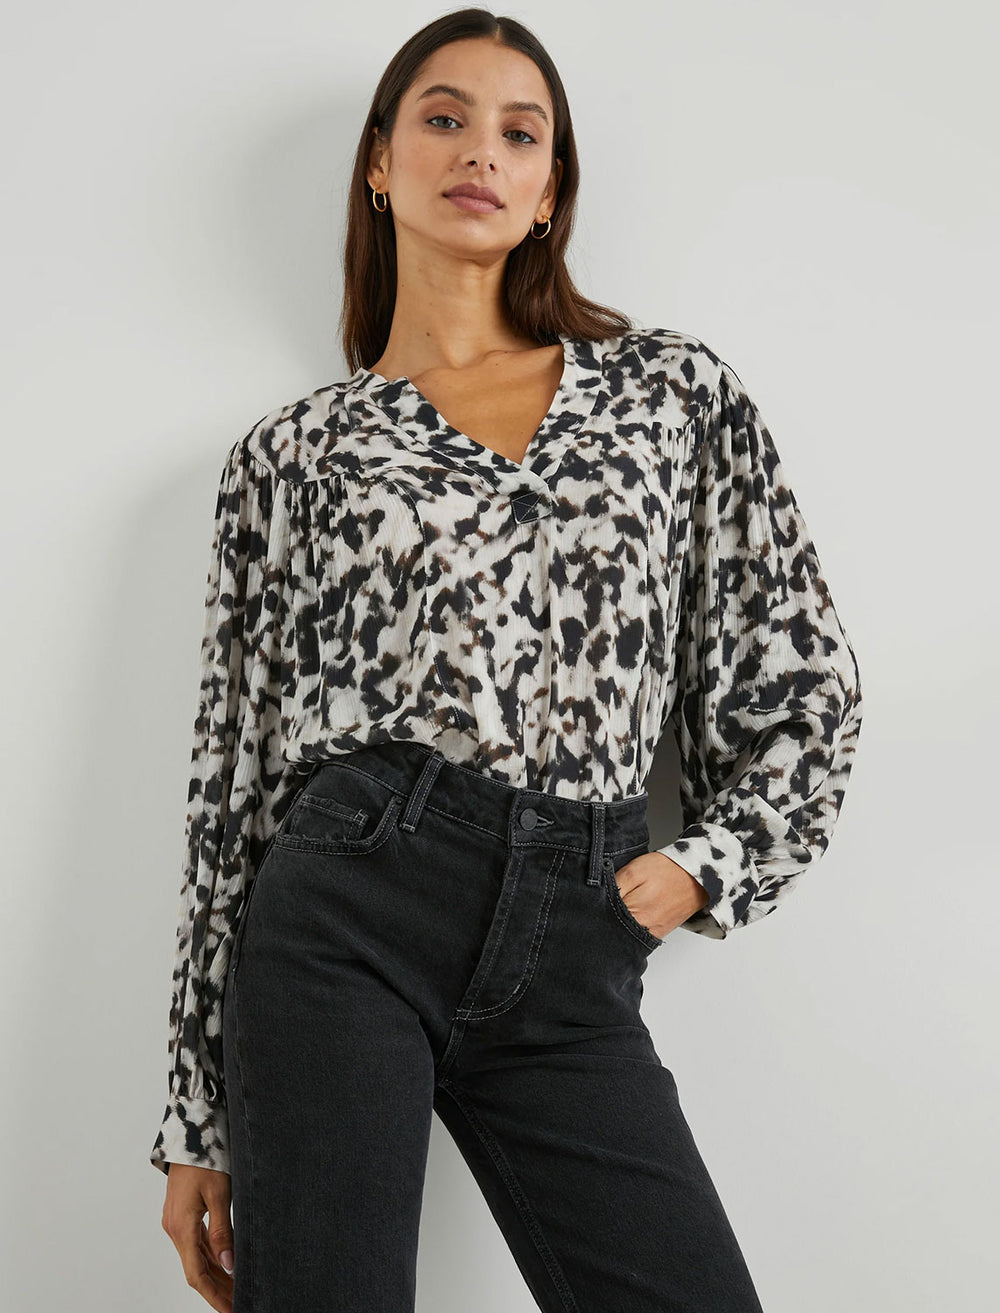 Model wearing Rails' fable blouse in blurred cheetah.